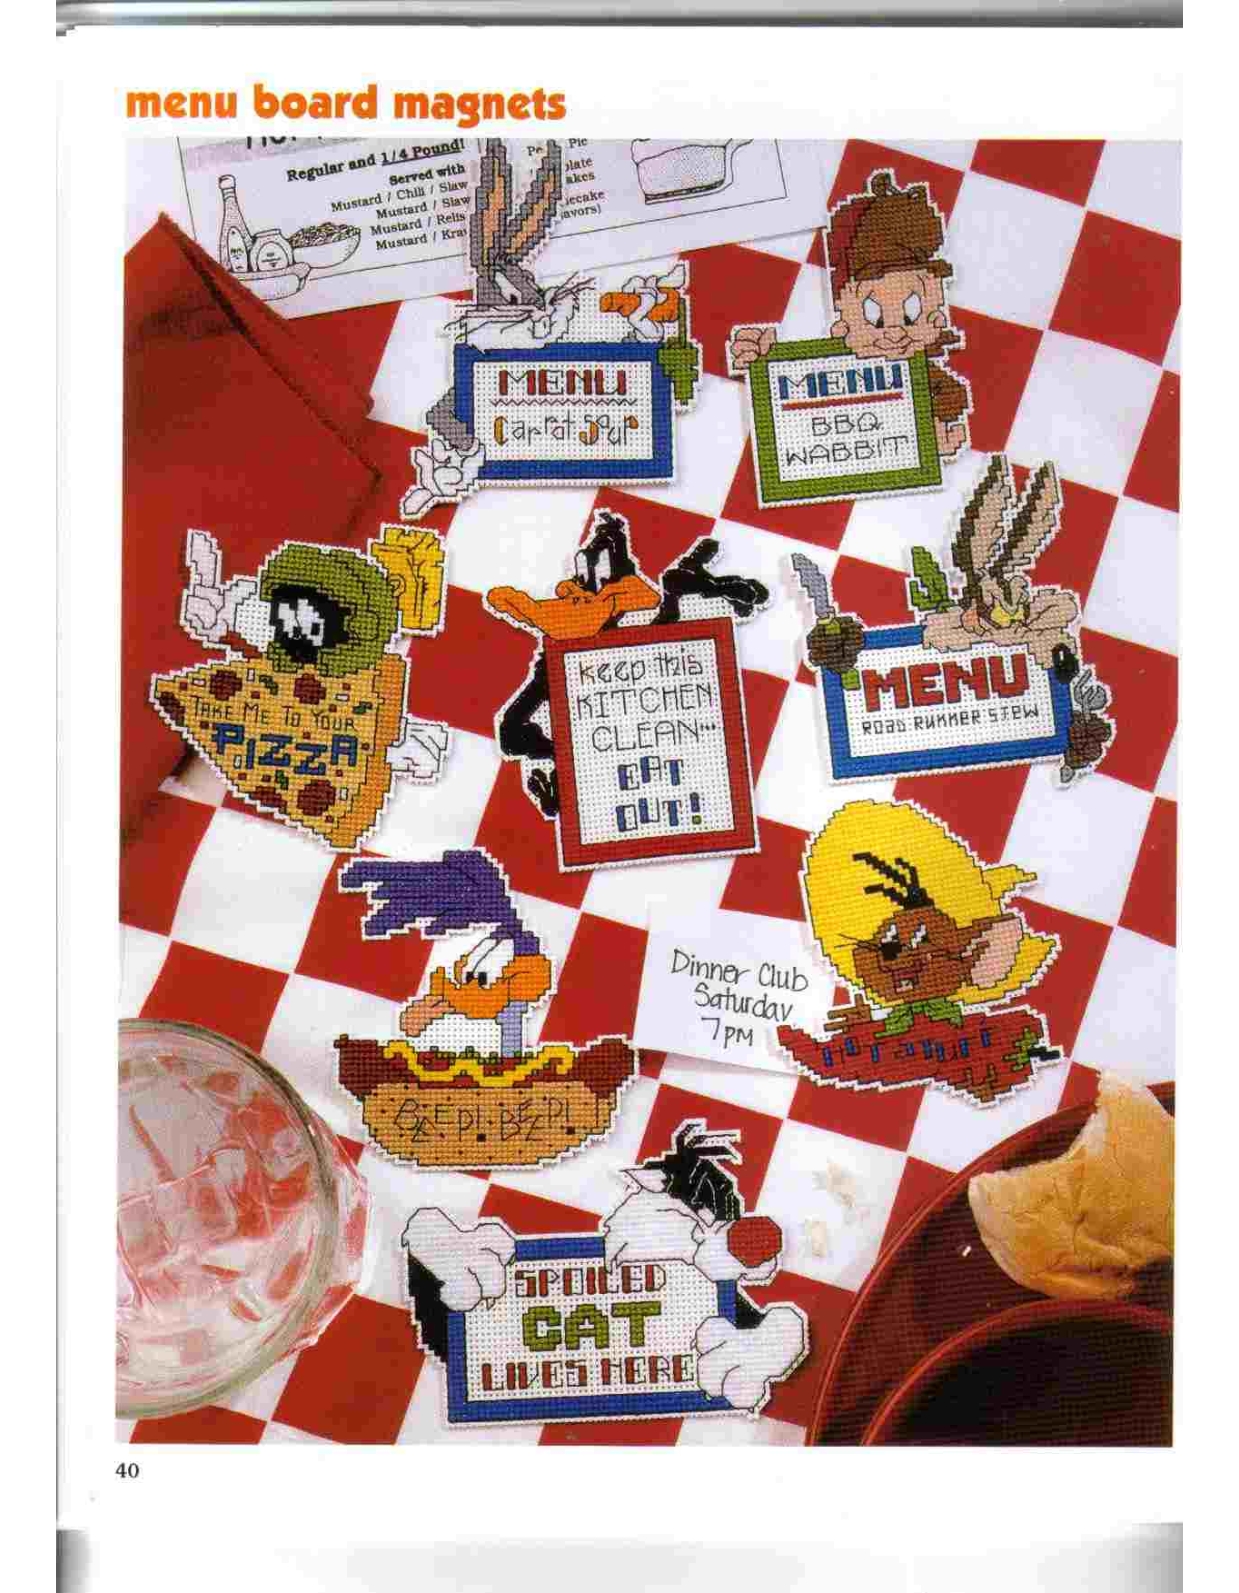 Funny cross stitch magnets with Looney Tunes characters (1)